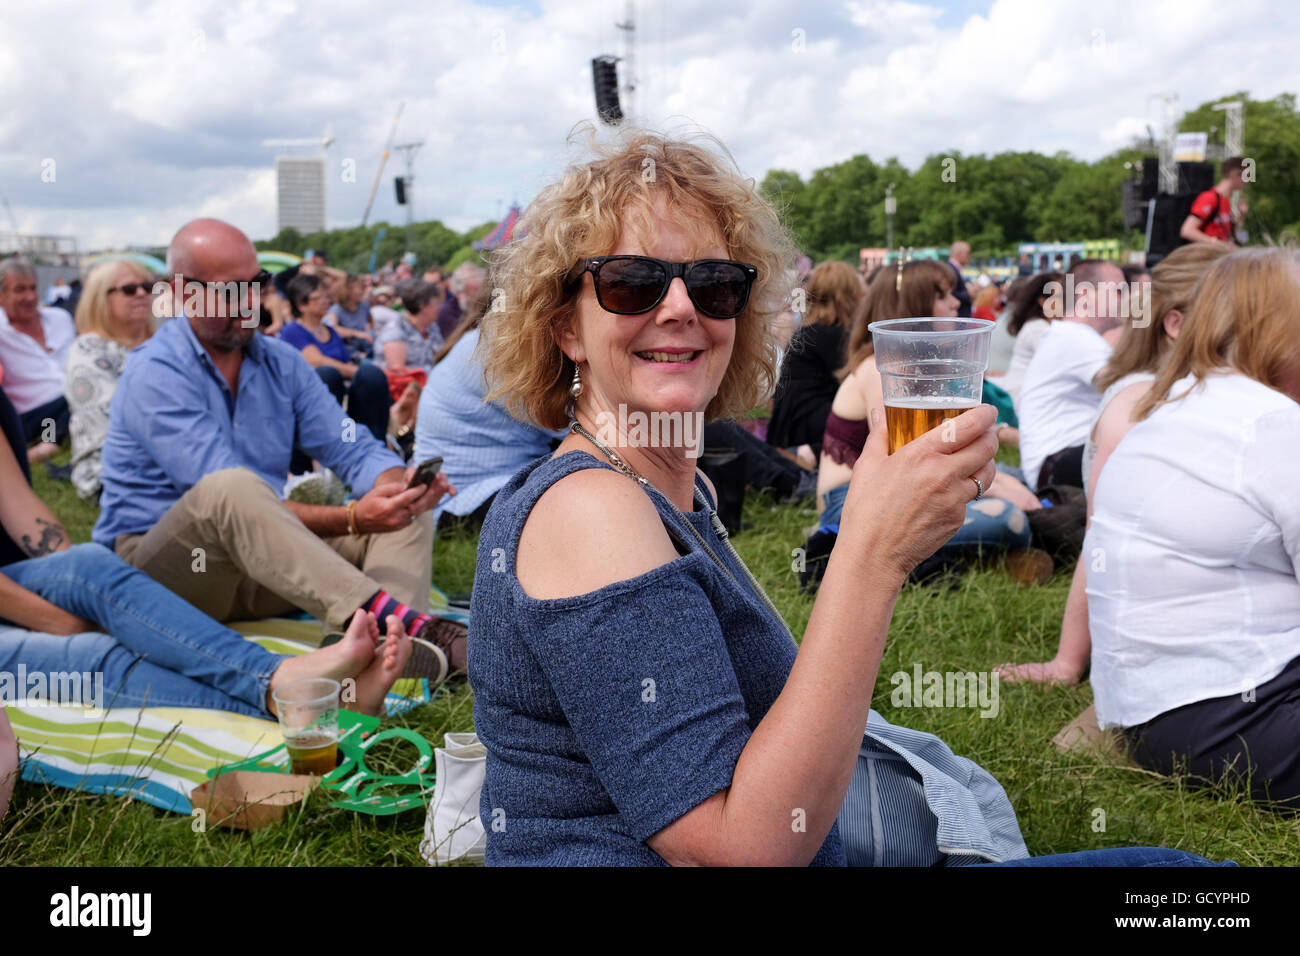 Woman enjoying a pint of beer outside in a plastic glass in summer UK Stock Photo